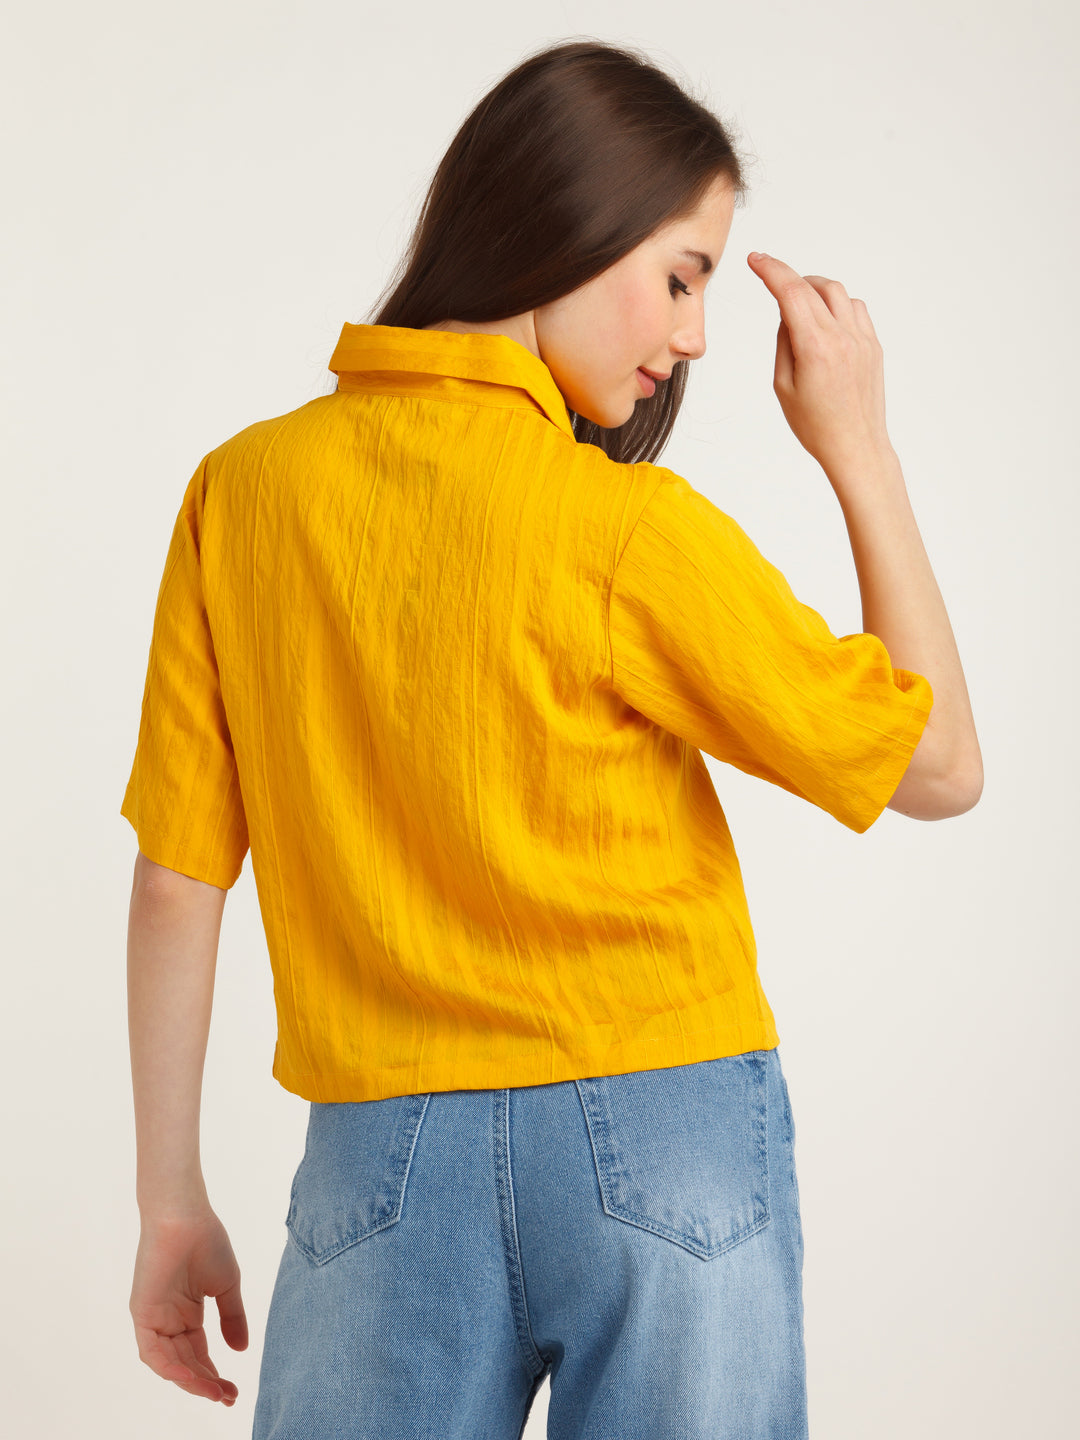 Yellow Solid Shirt For Women